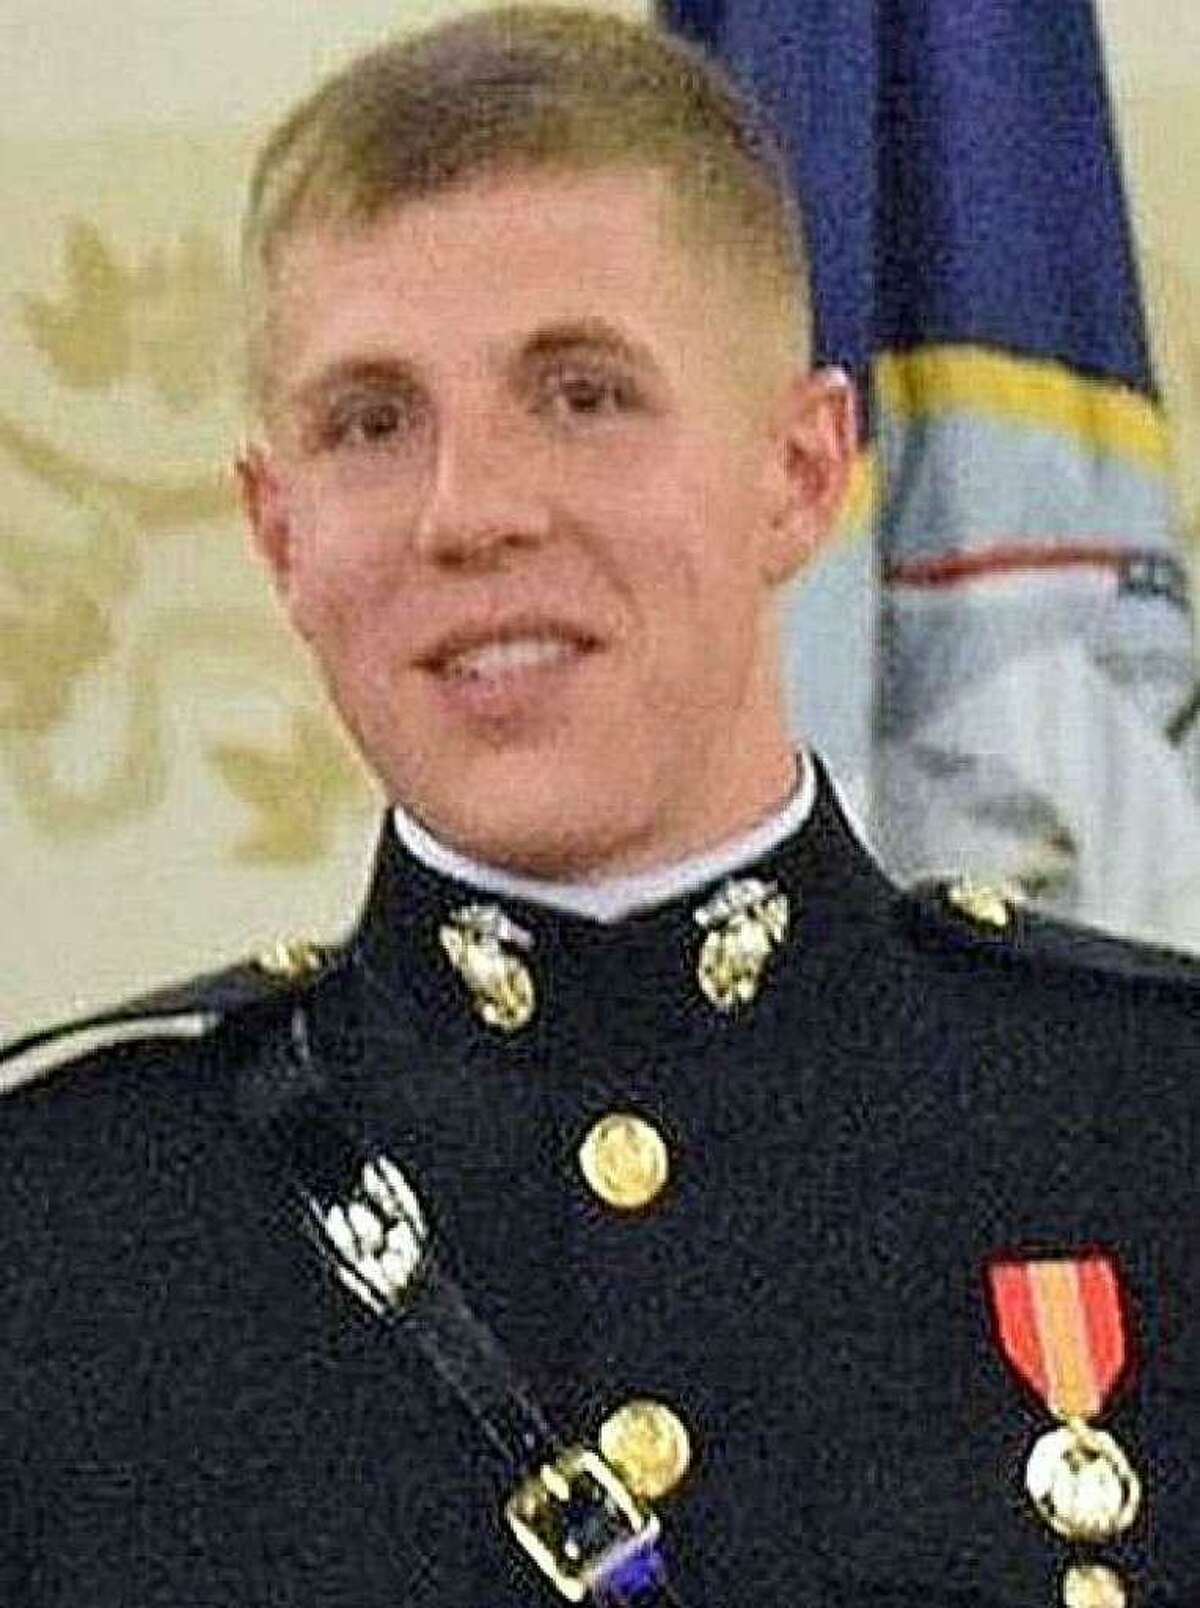 The search for First Lt. Matthew Kraft, a missing Marine from Washington, Conn., through avalanche prone areas of the Sierra Nevada has been put on "limited continuous mode," according to search officials.